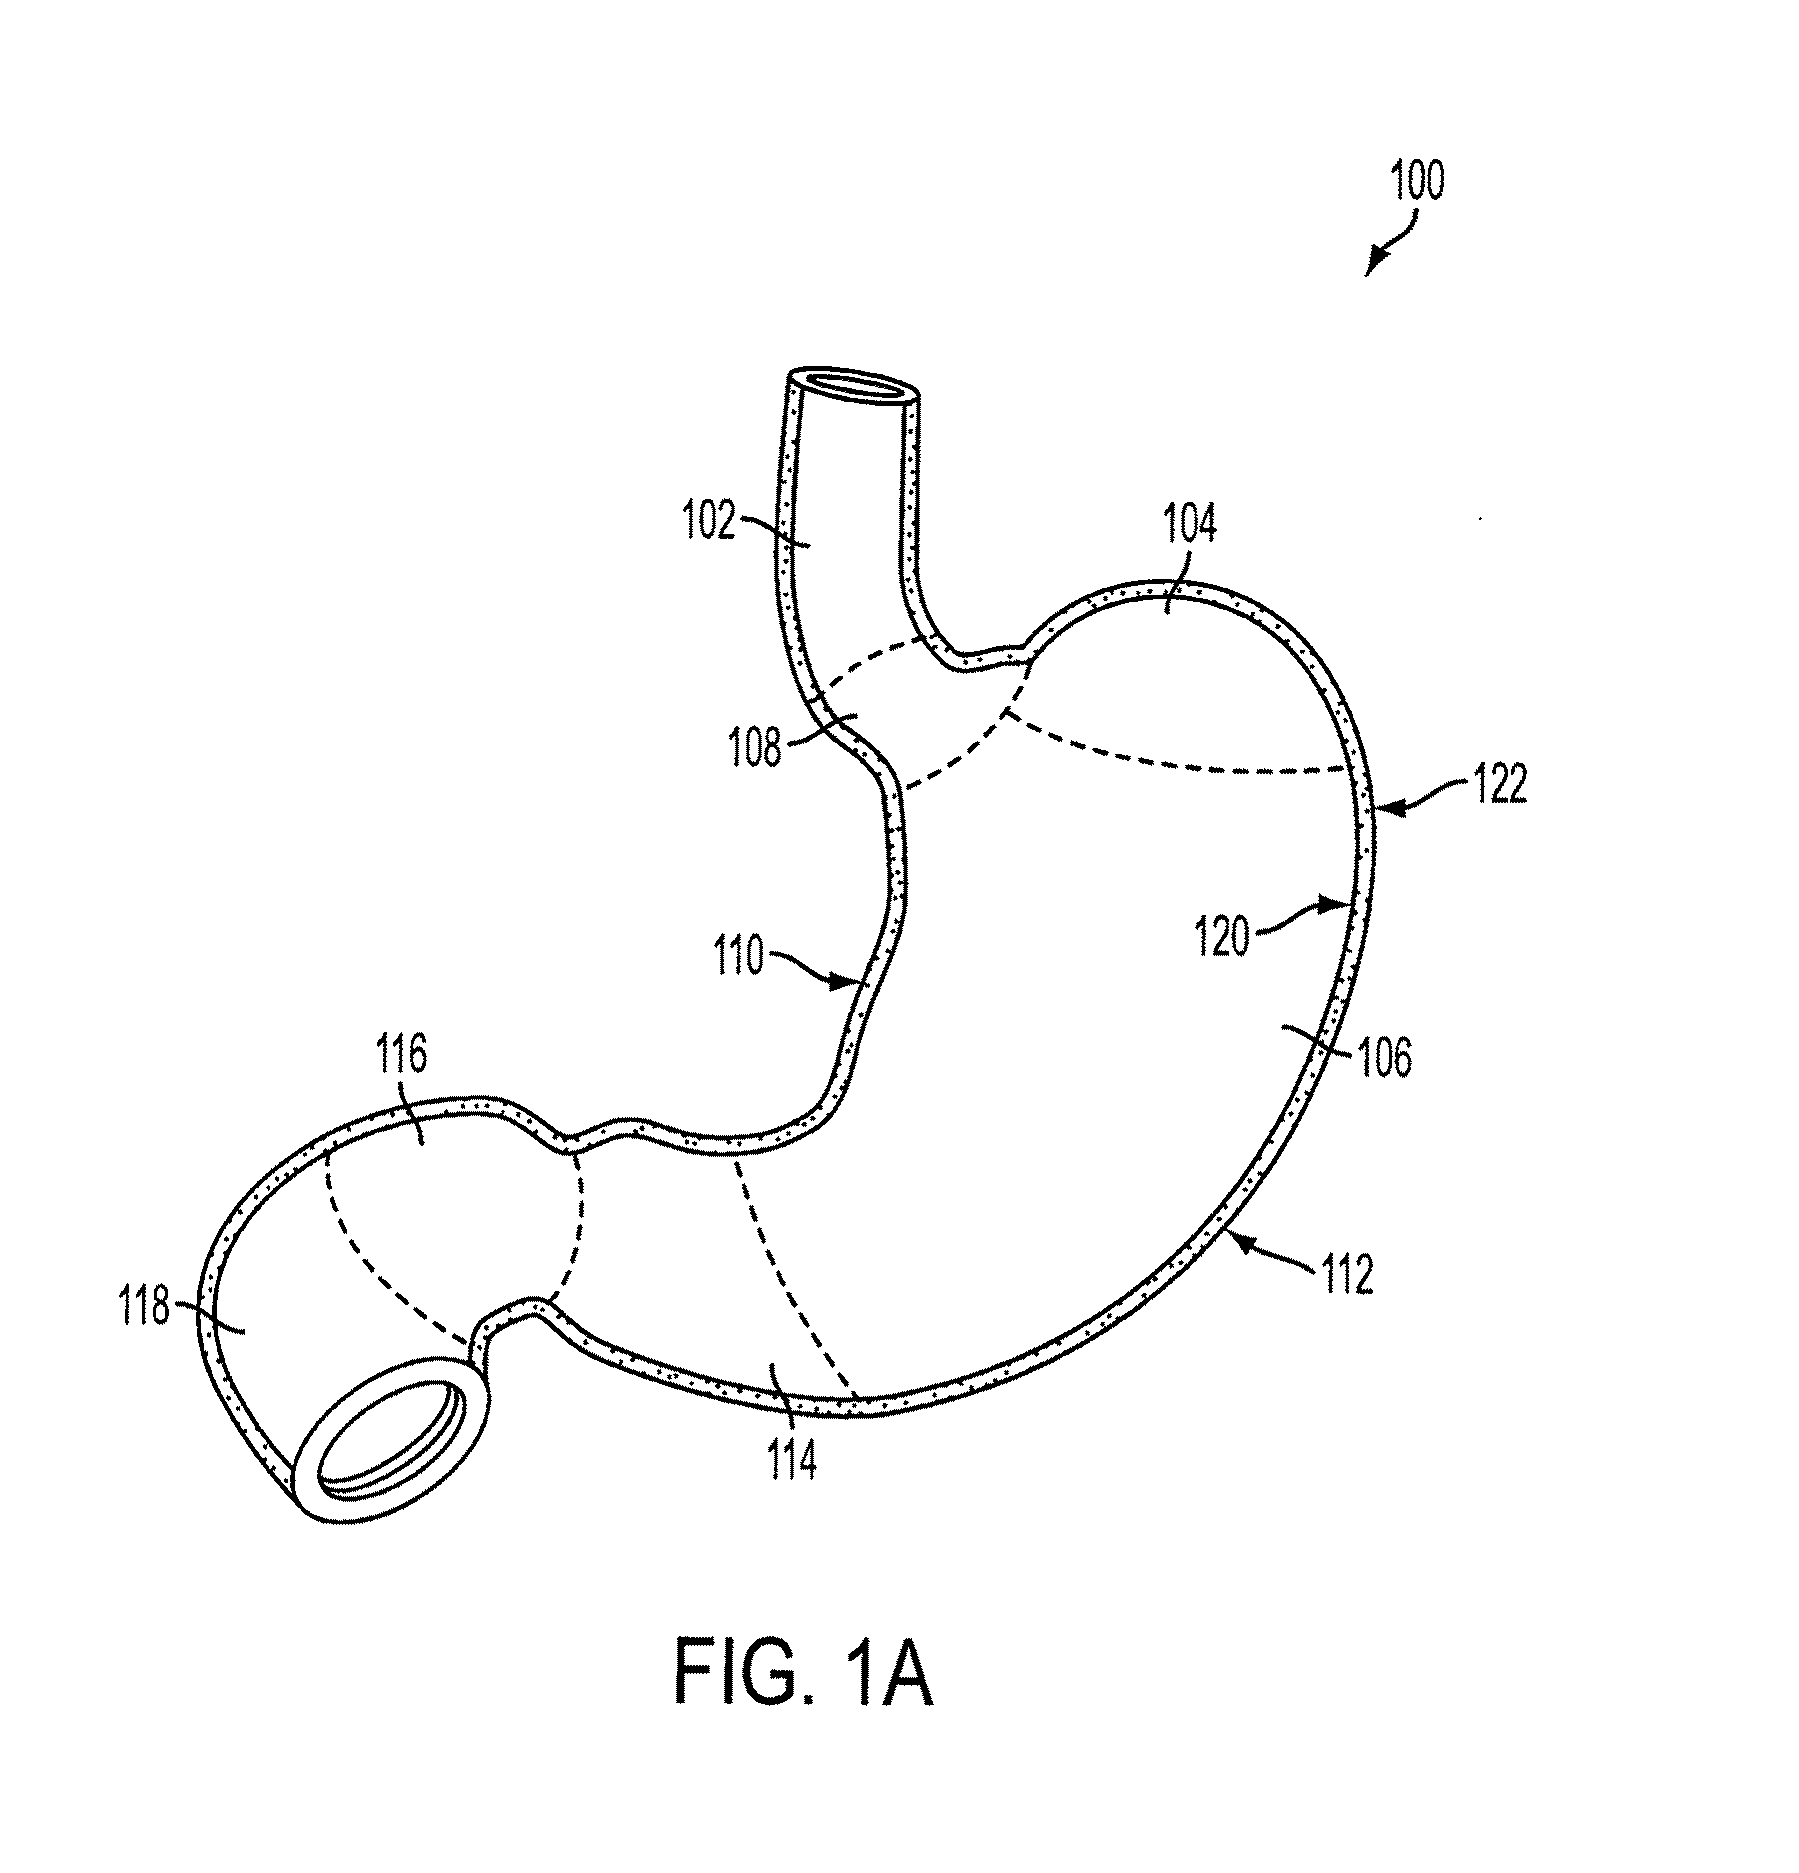 Method and apparatus for gastric restriction of the stomach to treat obesity